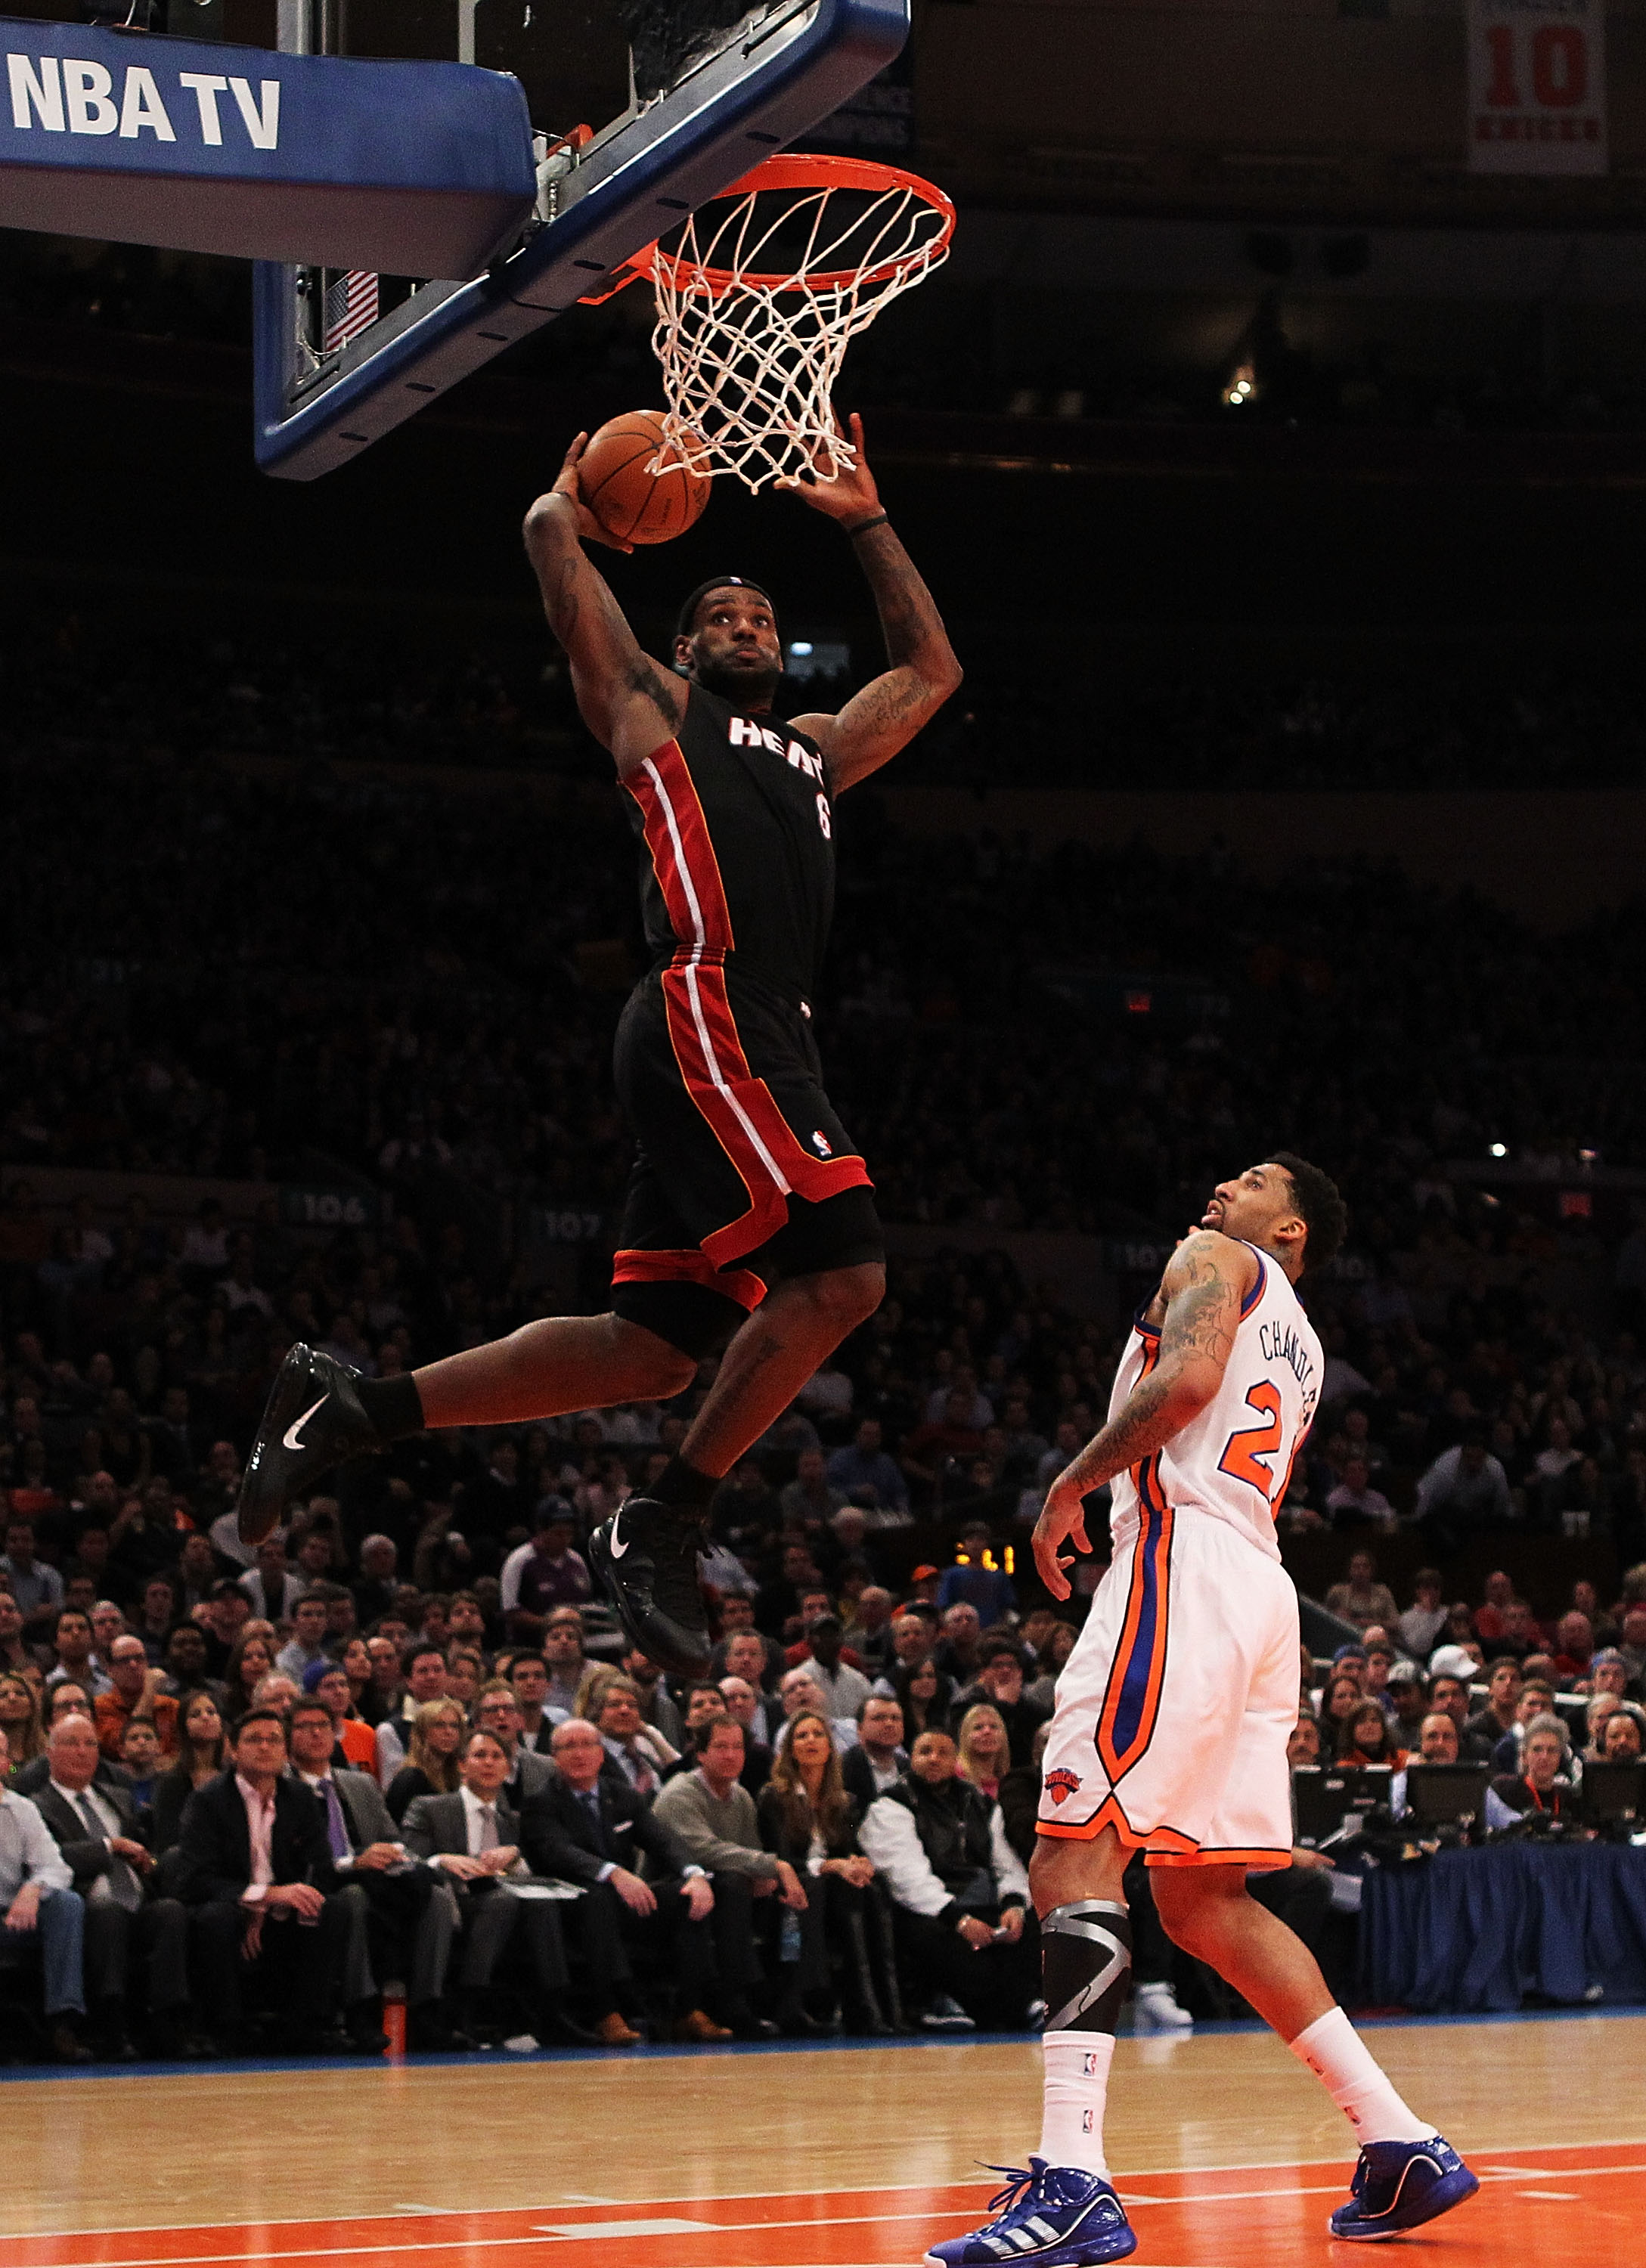 Ex Miami Heat Player LeBron James Landed One Of His Greatest Slam Dunks 7  Years Ago - Narcity